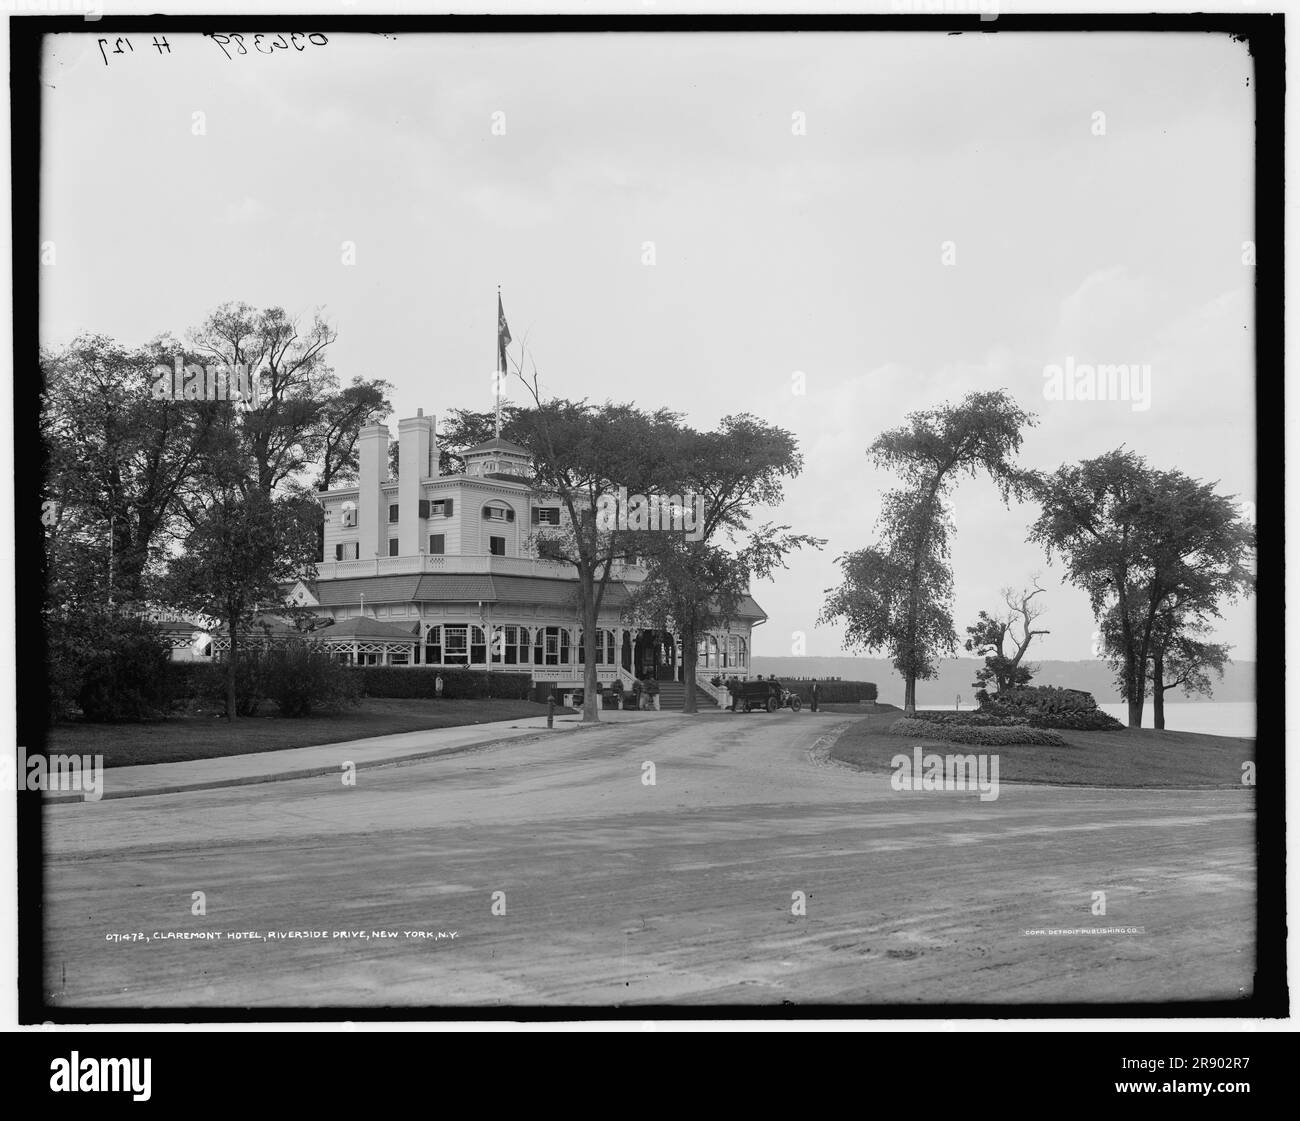 Claremont Hotel i.e. Inn, Riverside Drive, New York, N.Y., c.between 1900 and 1910. Stock Photo